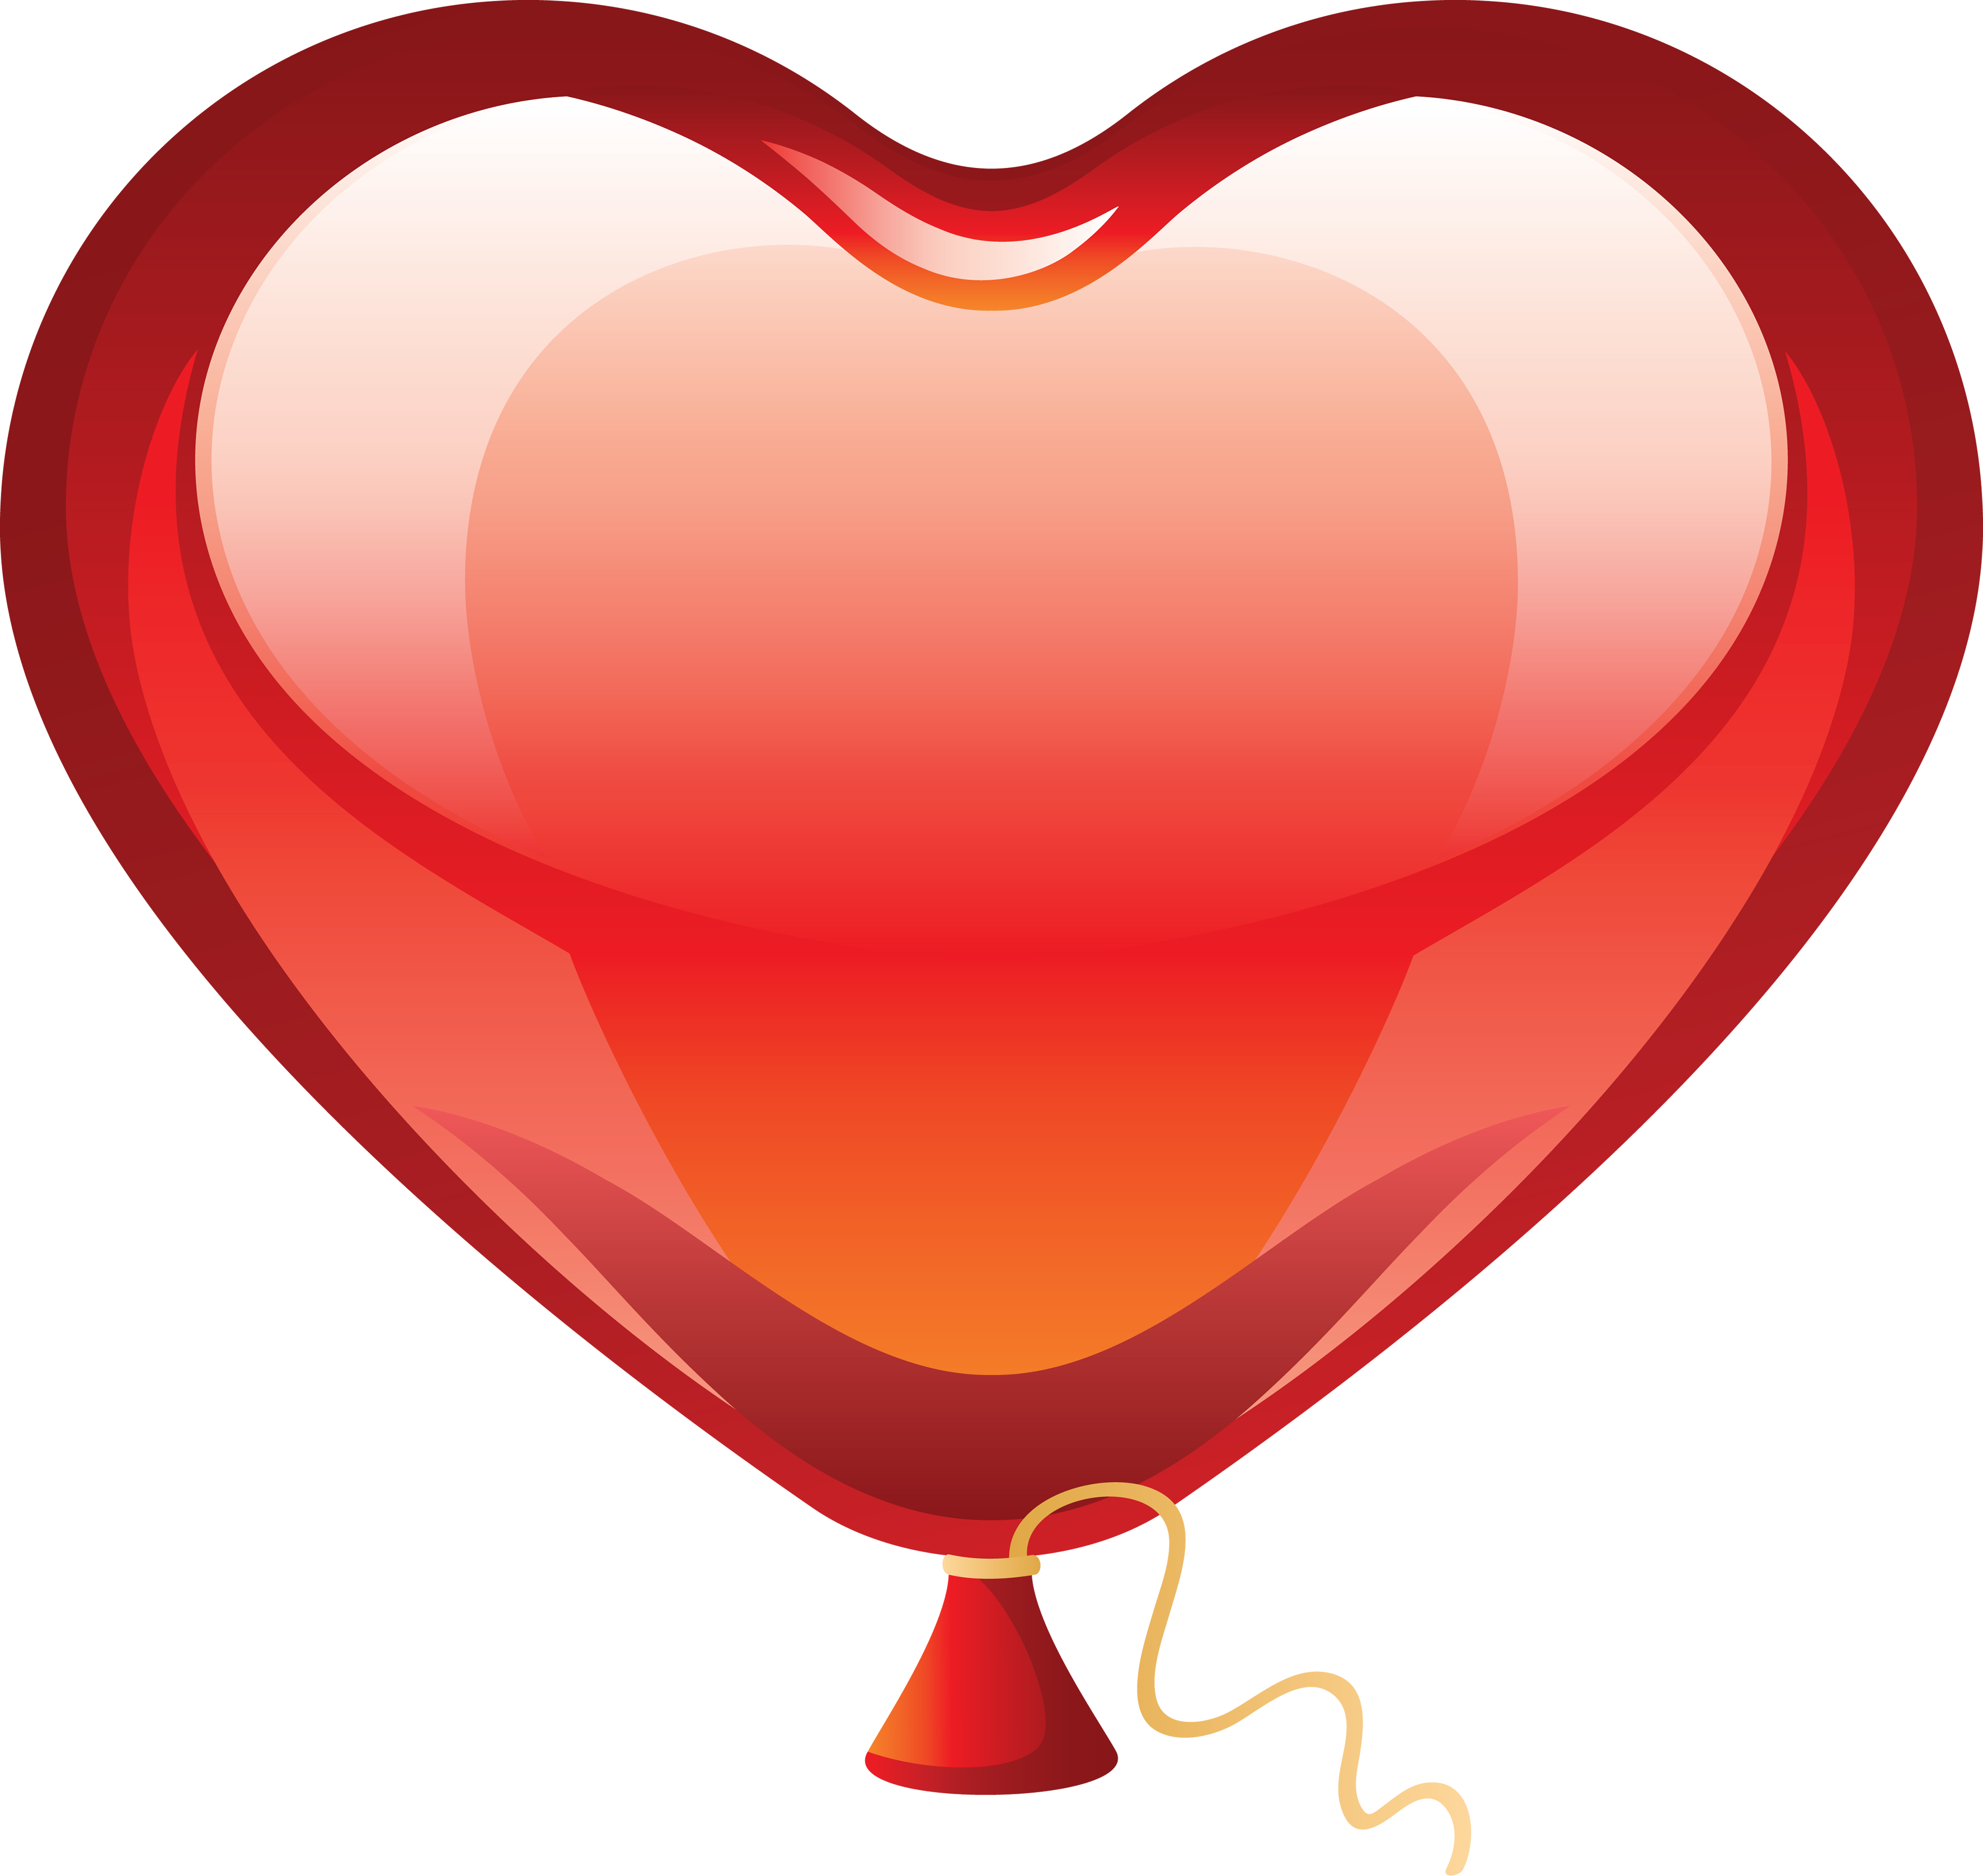 Heart Images Free | Free Download Clip Art | Free Clip Art | on ...